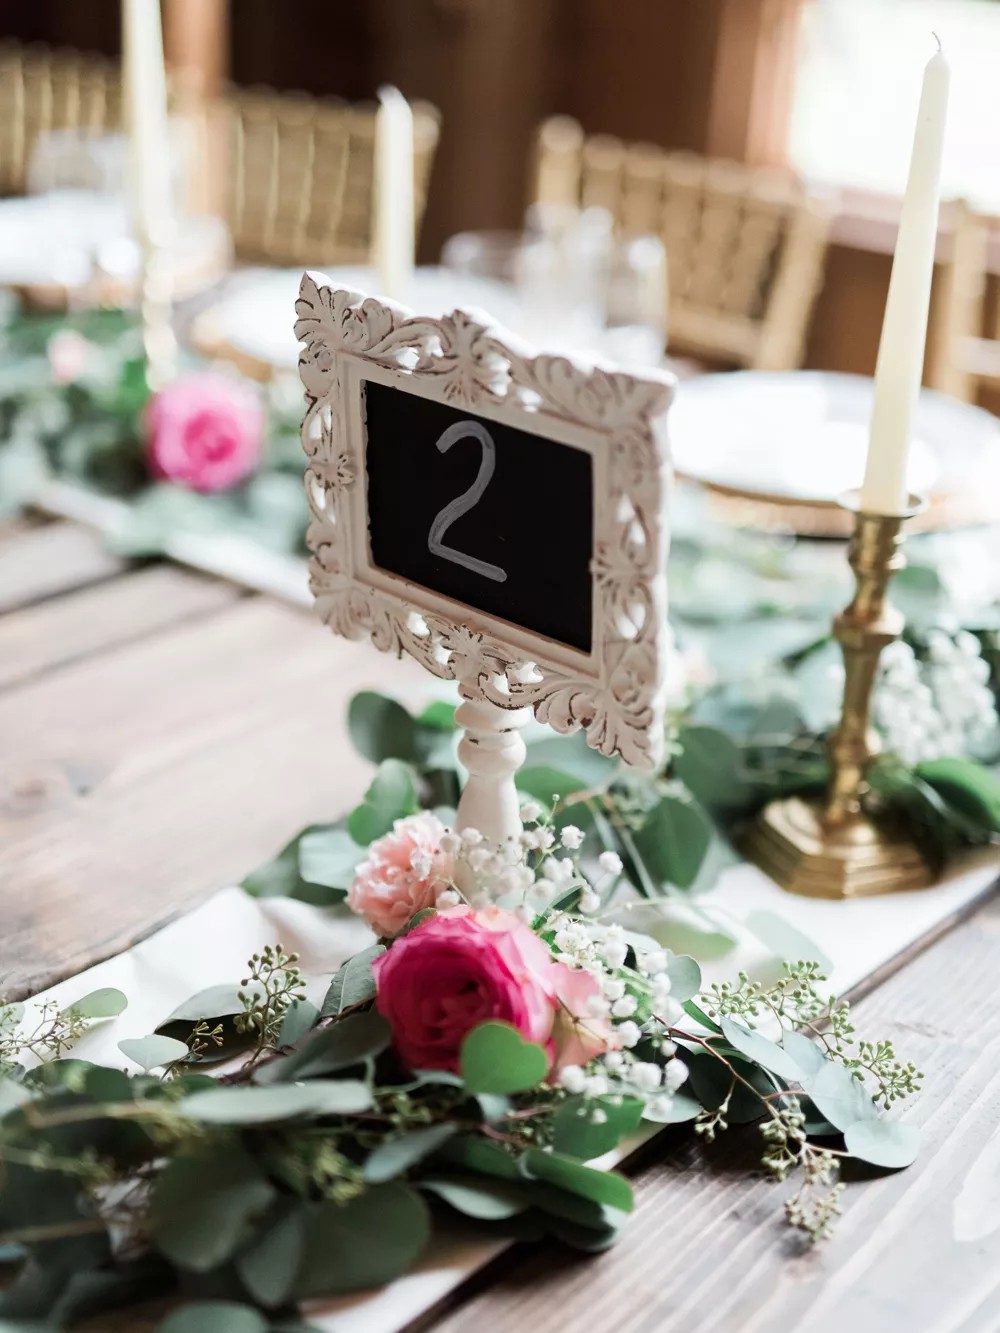 Unique Inspiration To Create Awesome Wedding Table Numbers